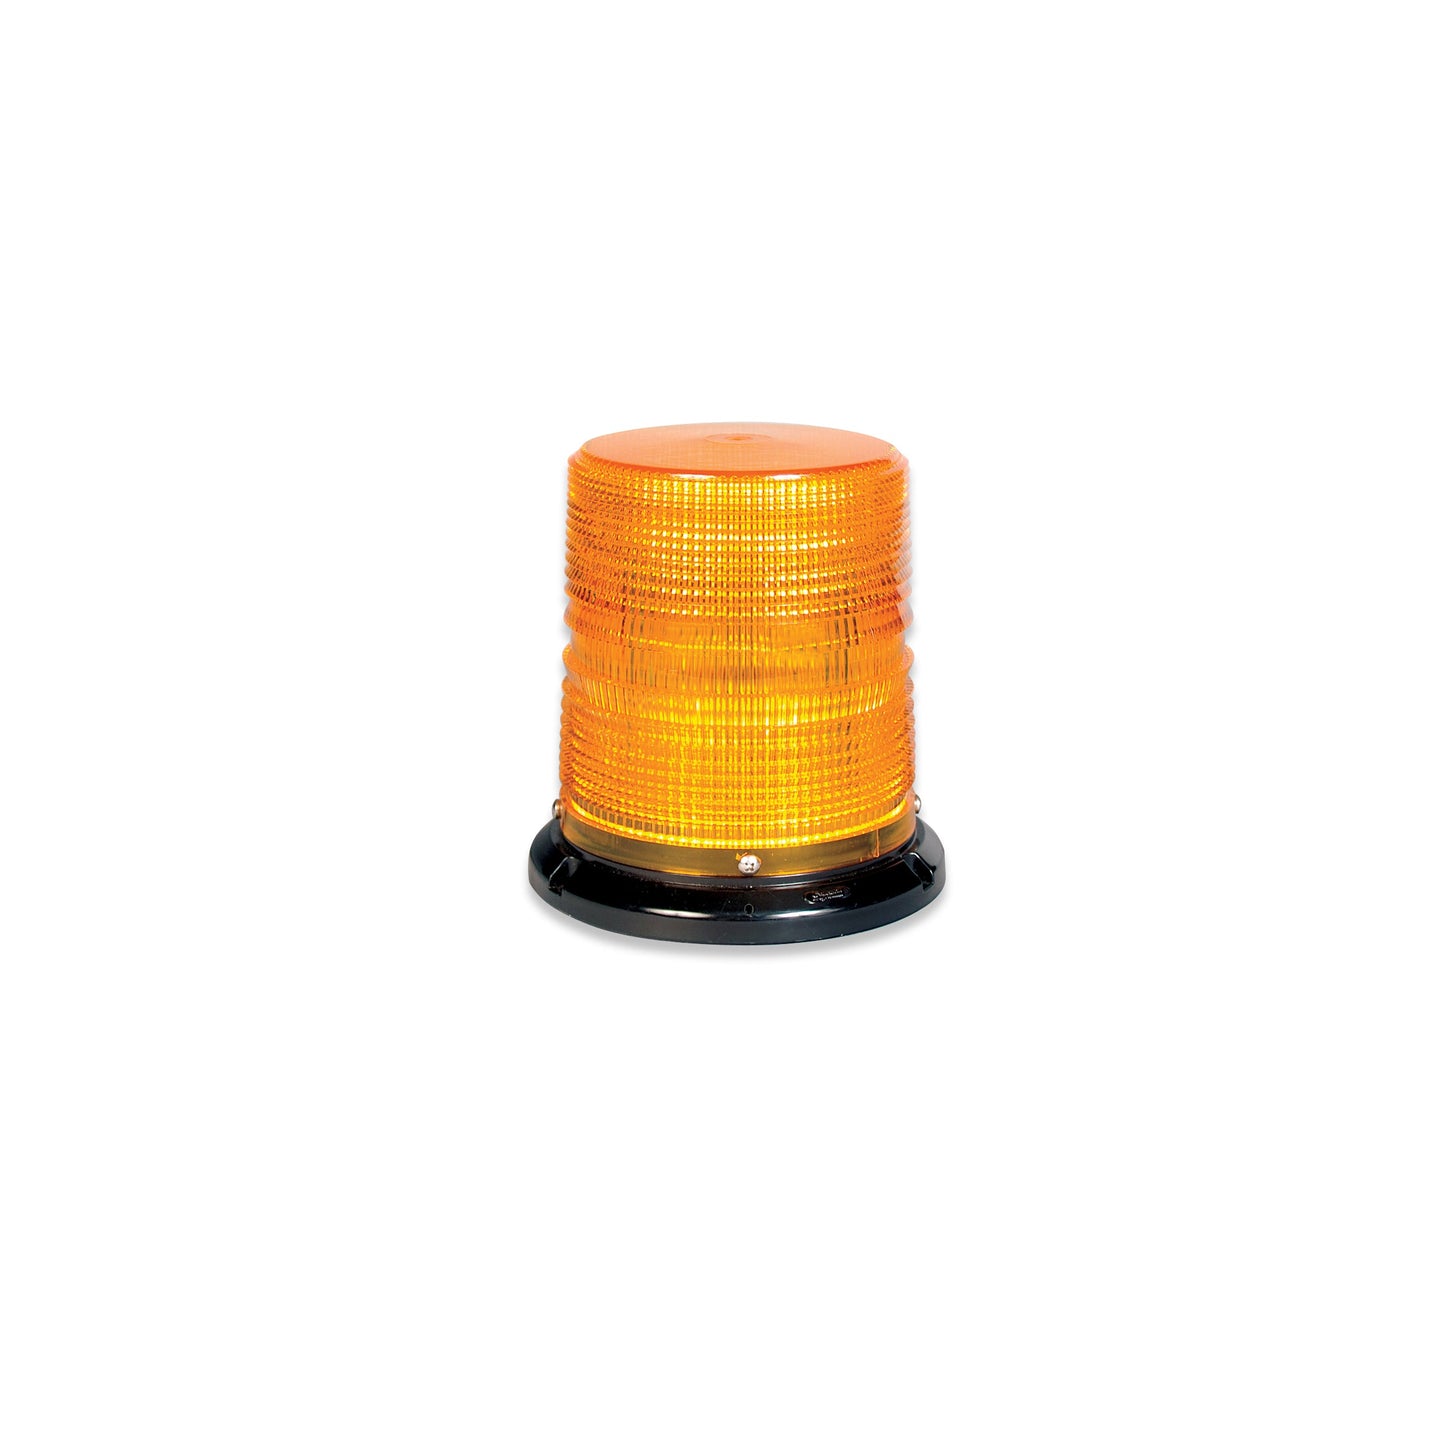 Soundoff Signal ELB45BMH+RR 4500 Series Led Beacon, 10-30V, Sae J845 Class 1 - Magnetic Mount, 6" Red Dome/ Red Leds